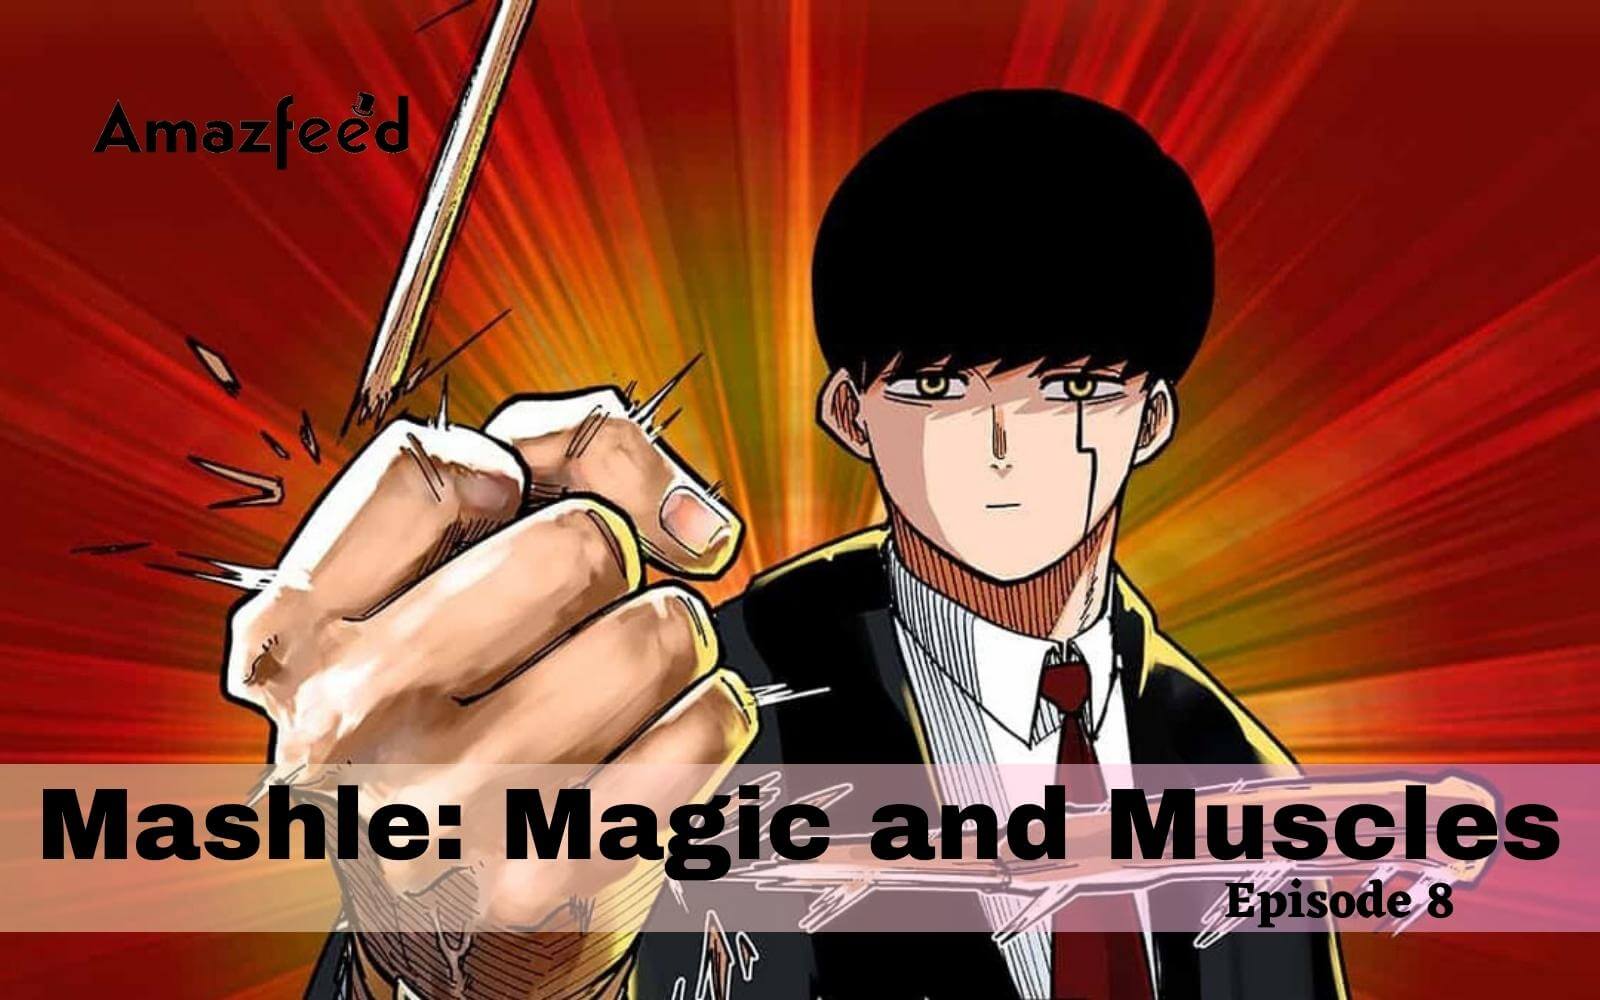 Mashle: Magic and Muscles Episode 8 Release Date 